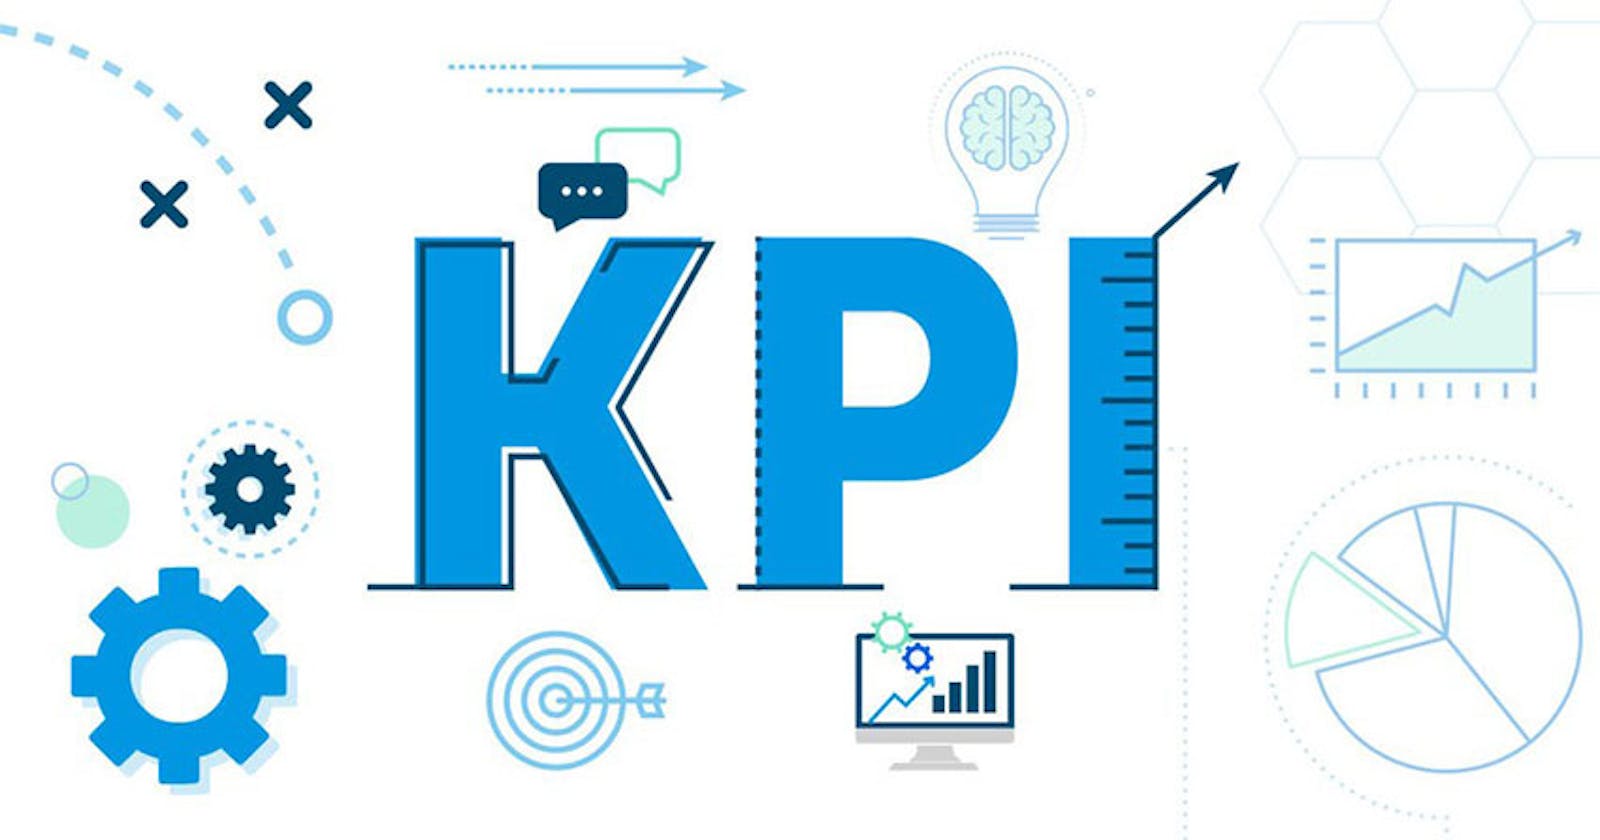 What are KPI?